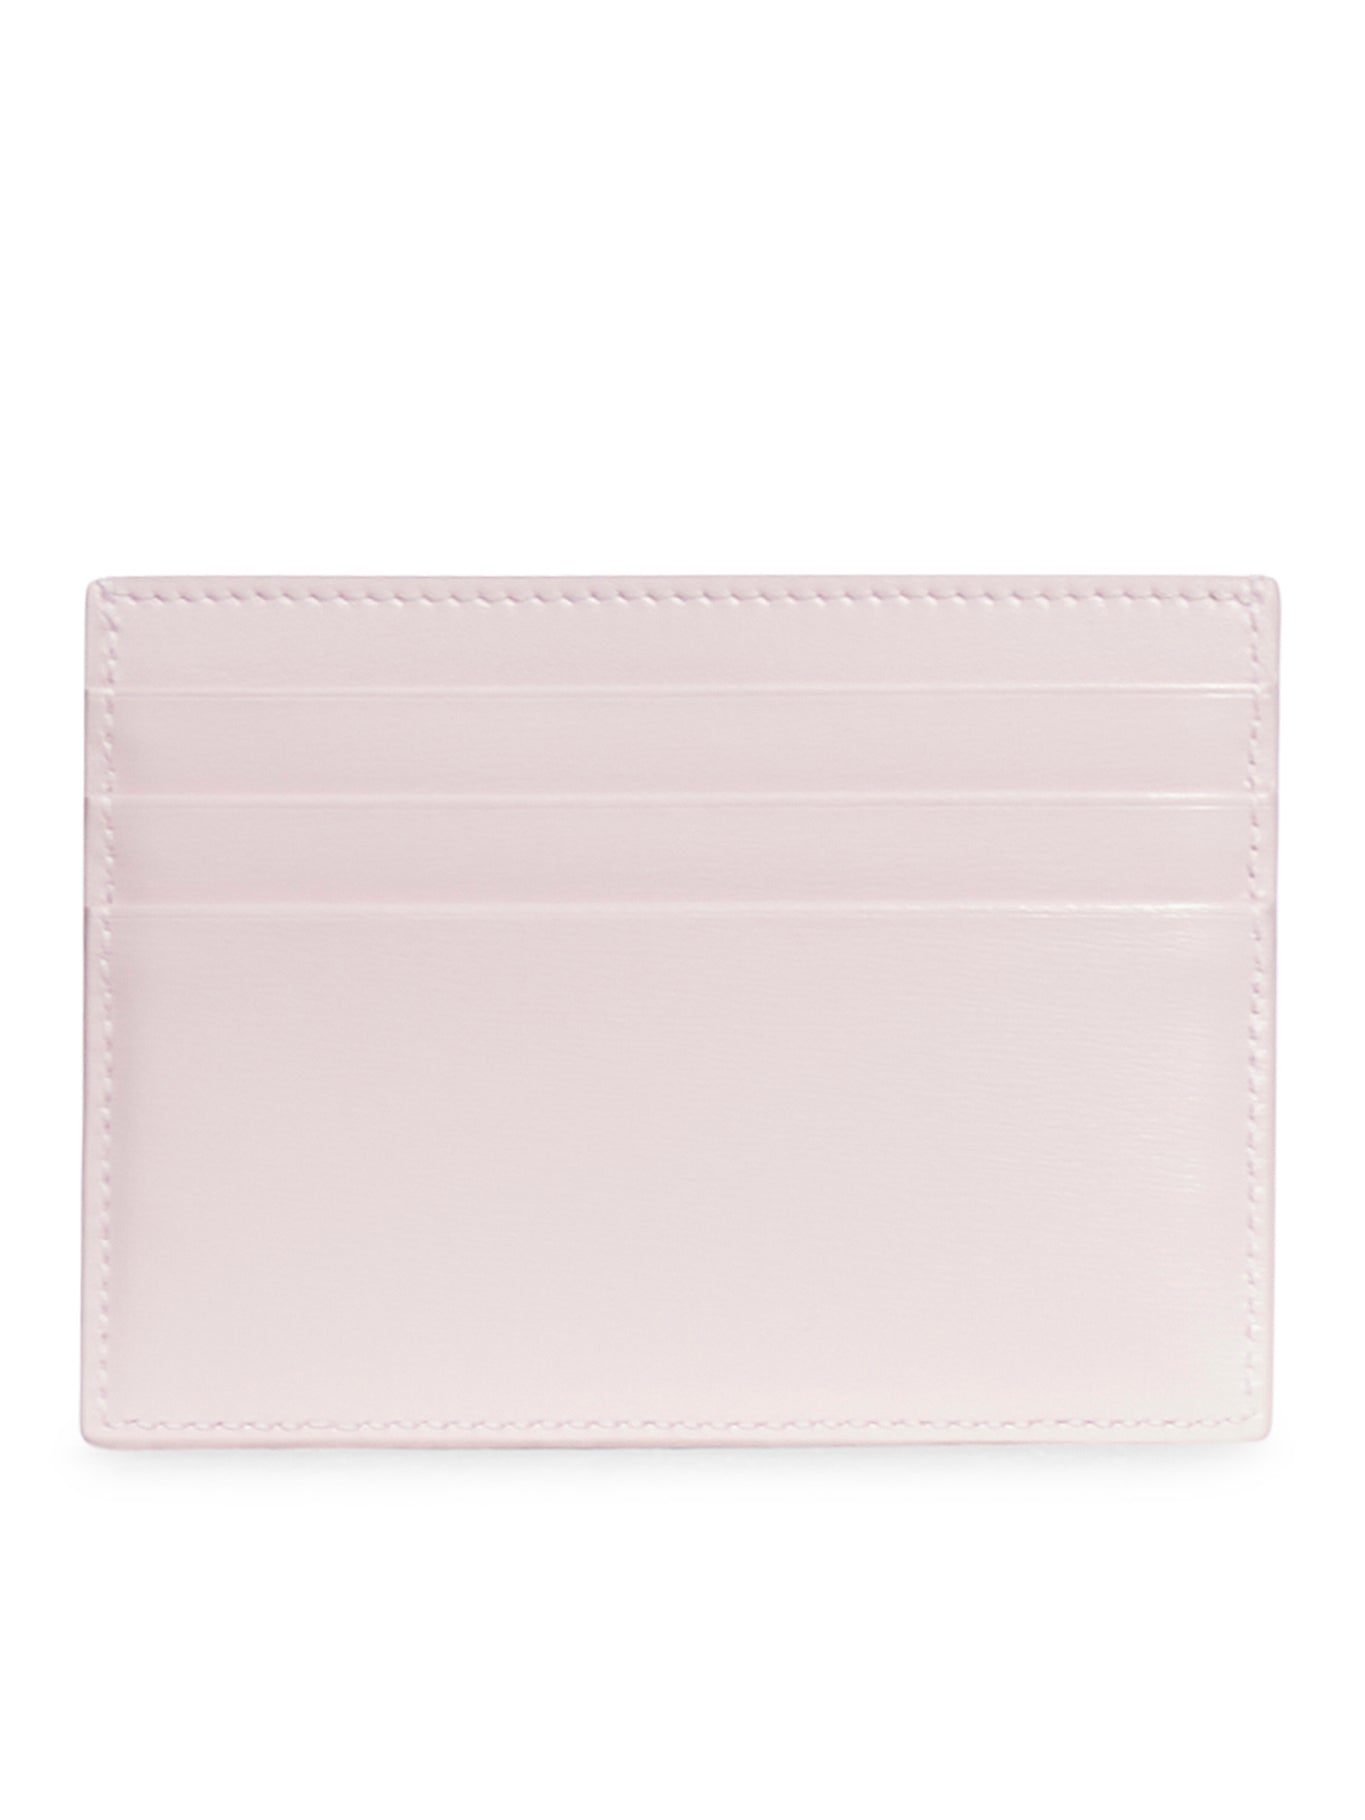 TRIOMPHE CARD HOLDER IN PASTEL PINK POLISHED CALF LEATHER